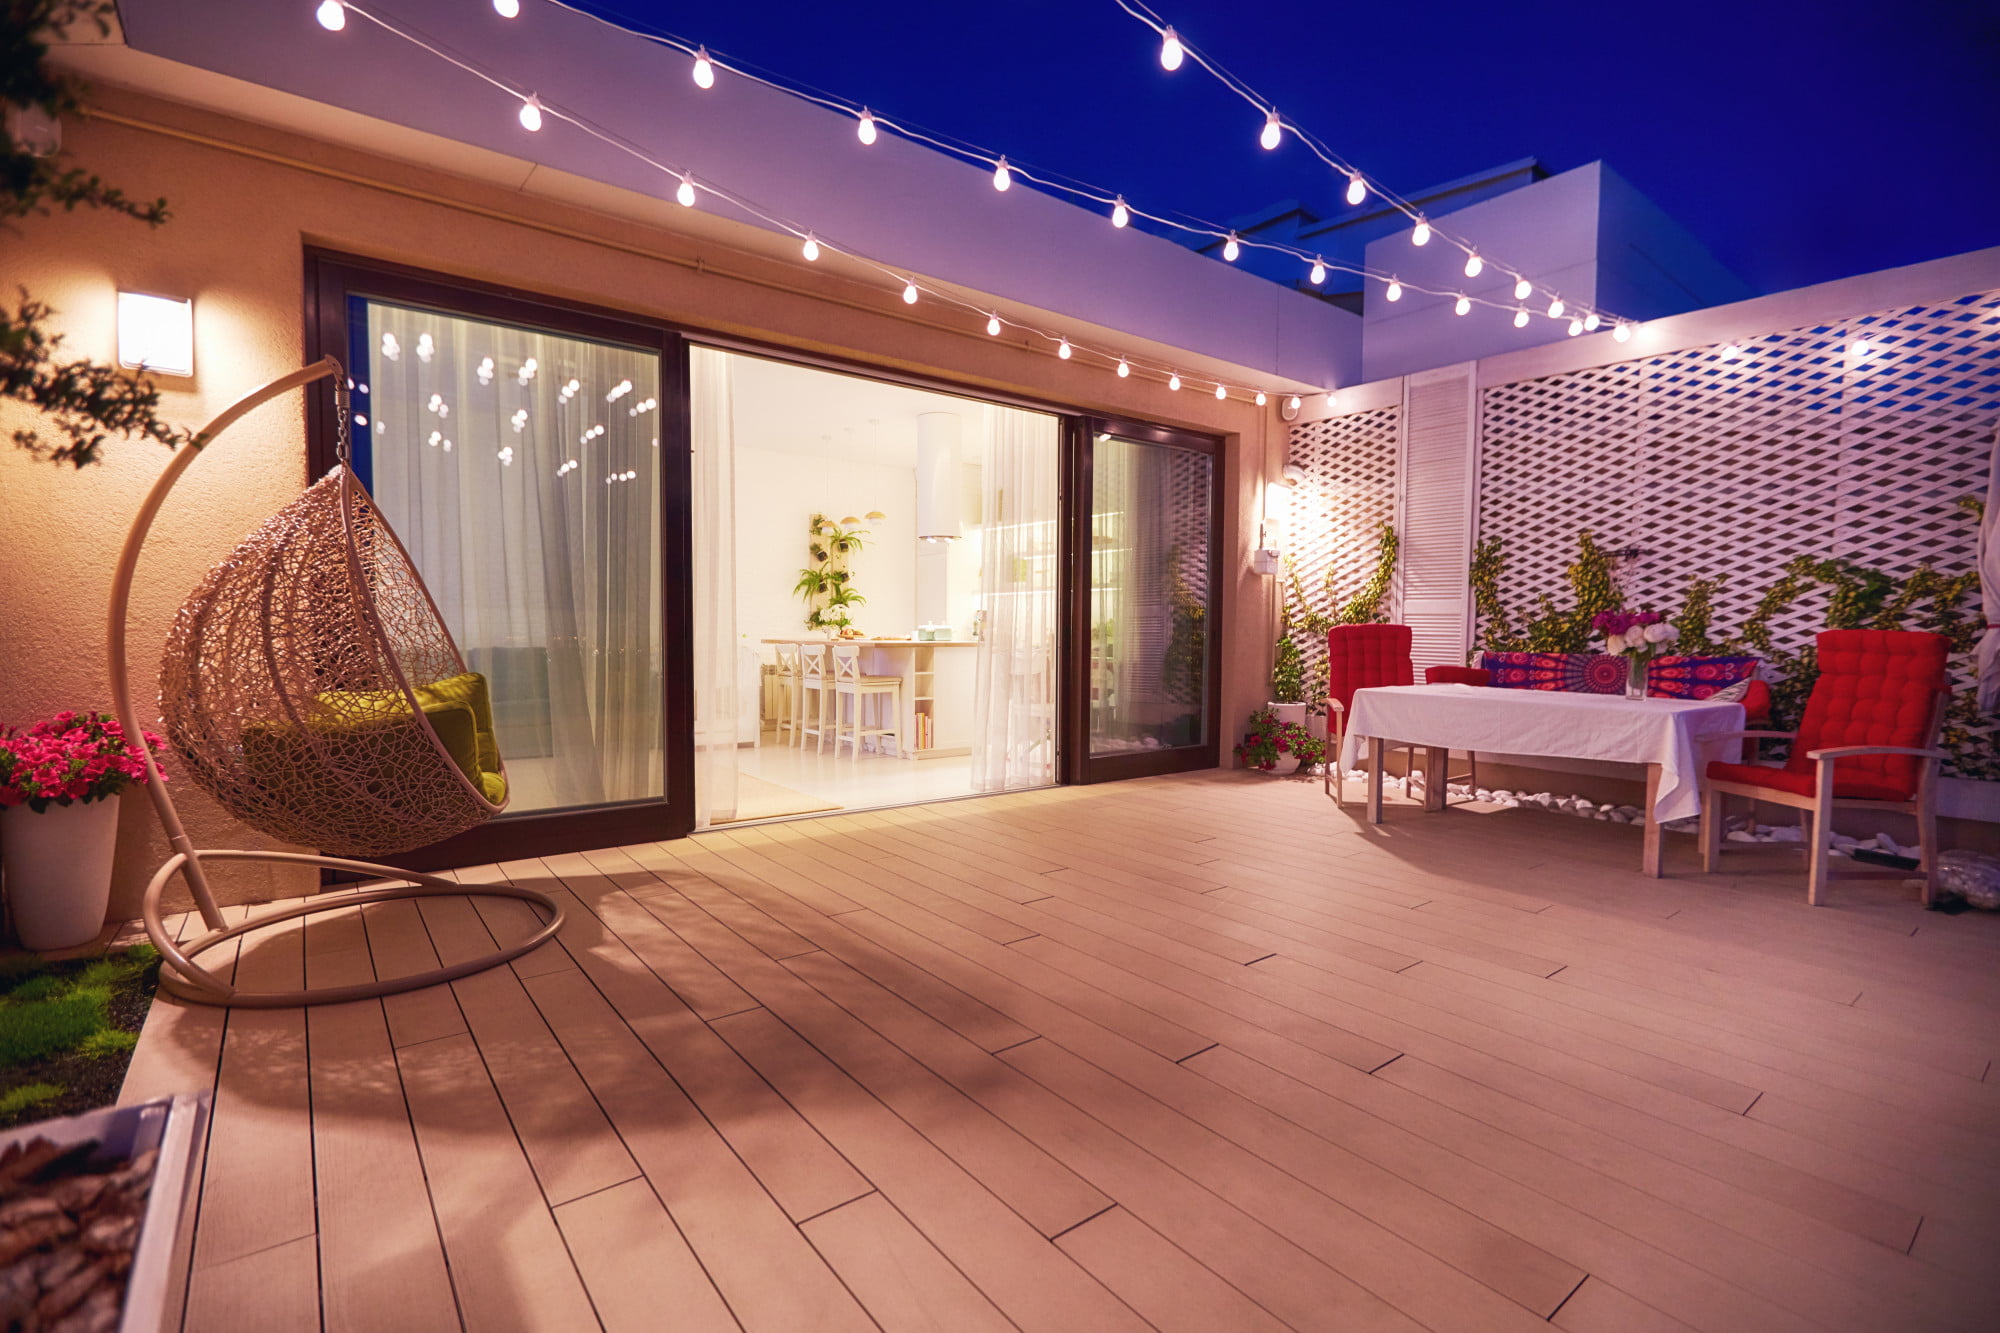 An outdoor living room can be a great space to spend time with friends and family. Learn how to create an inviting and comfortable space here.